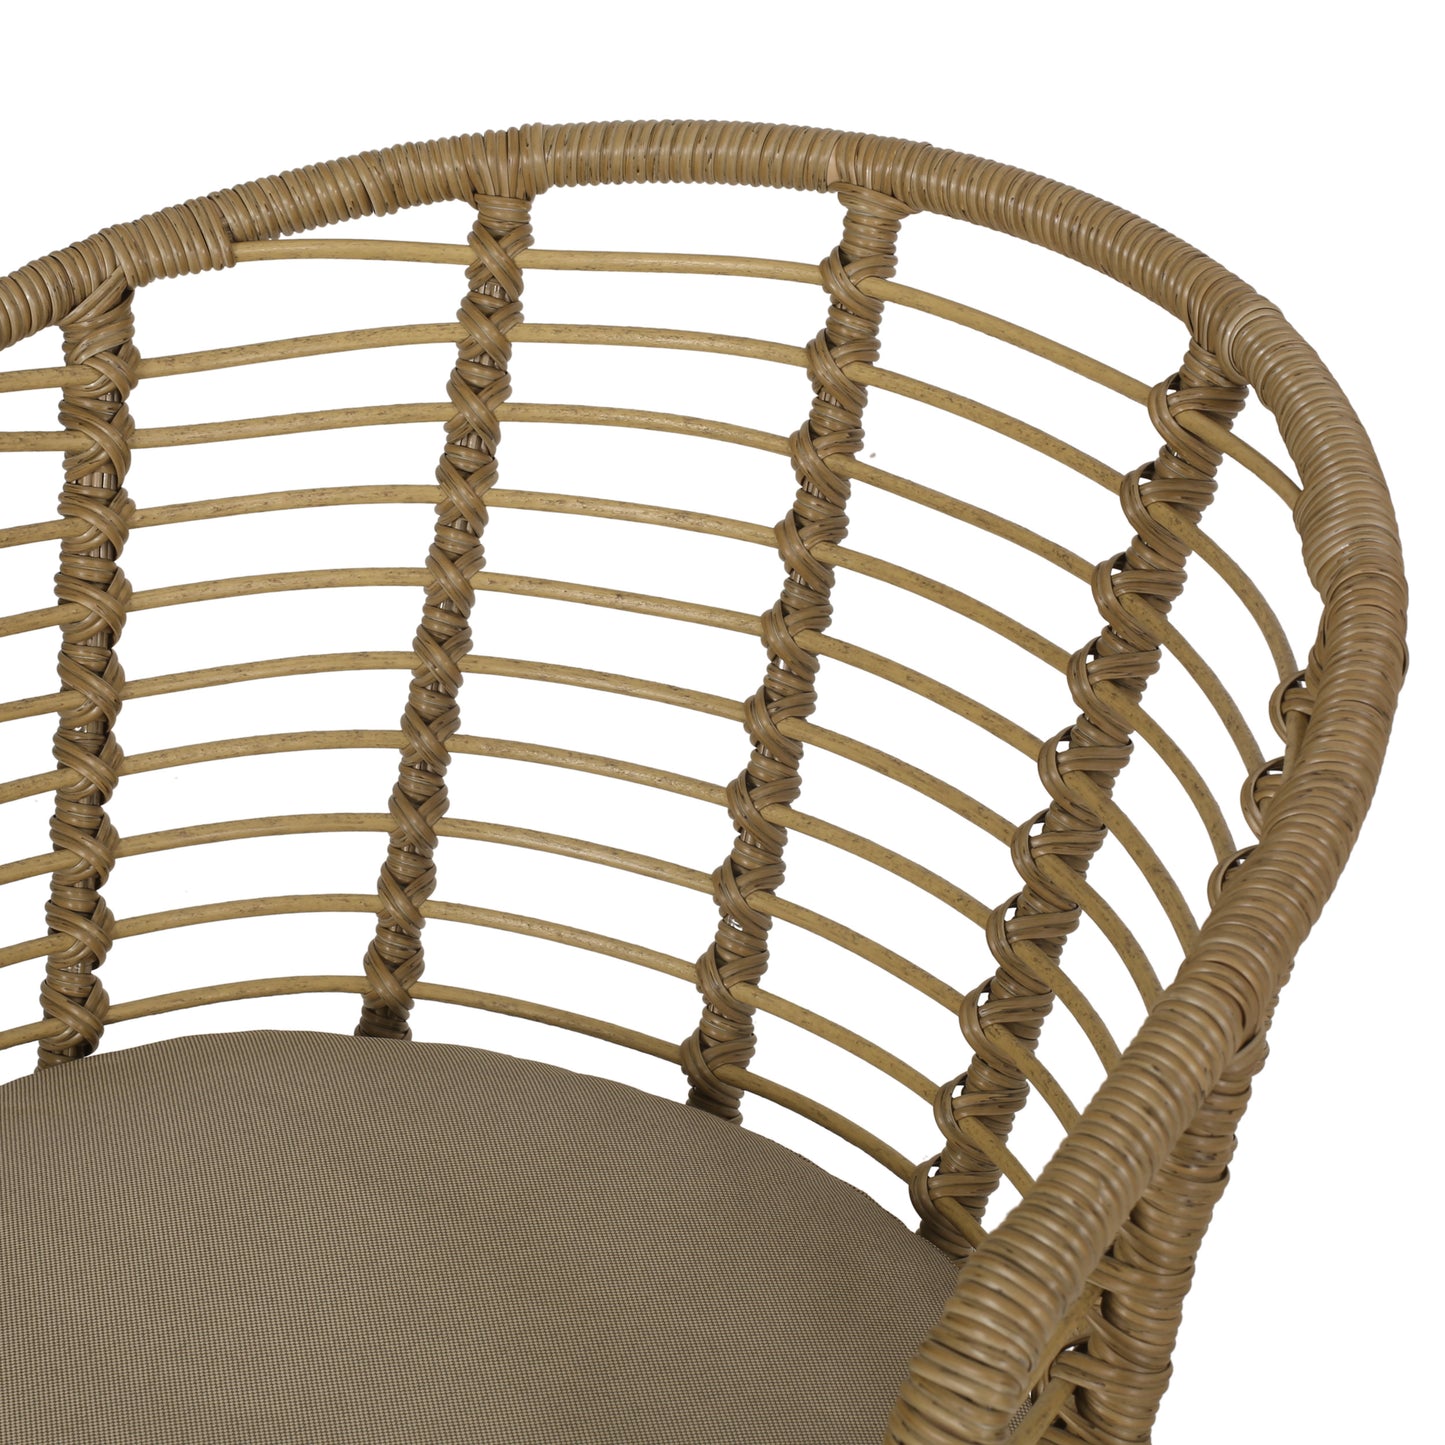 Monture Outdoor Wicker Chair with Water Resistant Cushion, Set of 2, Light Brown and Beige